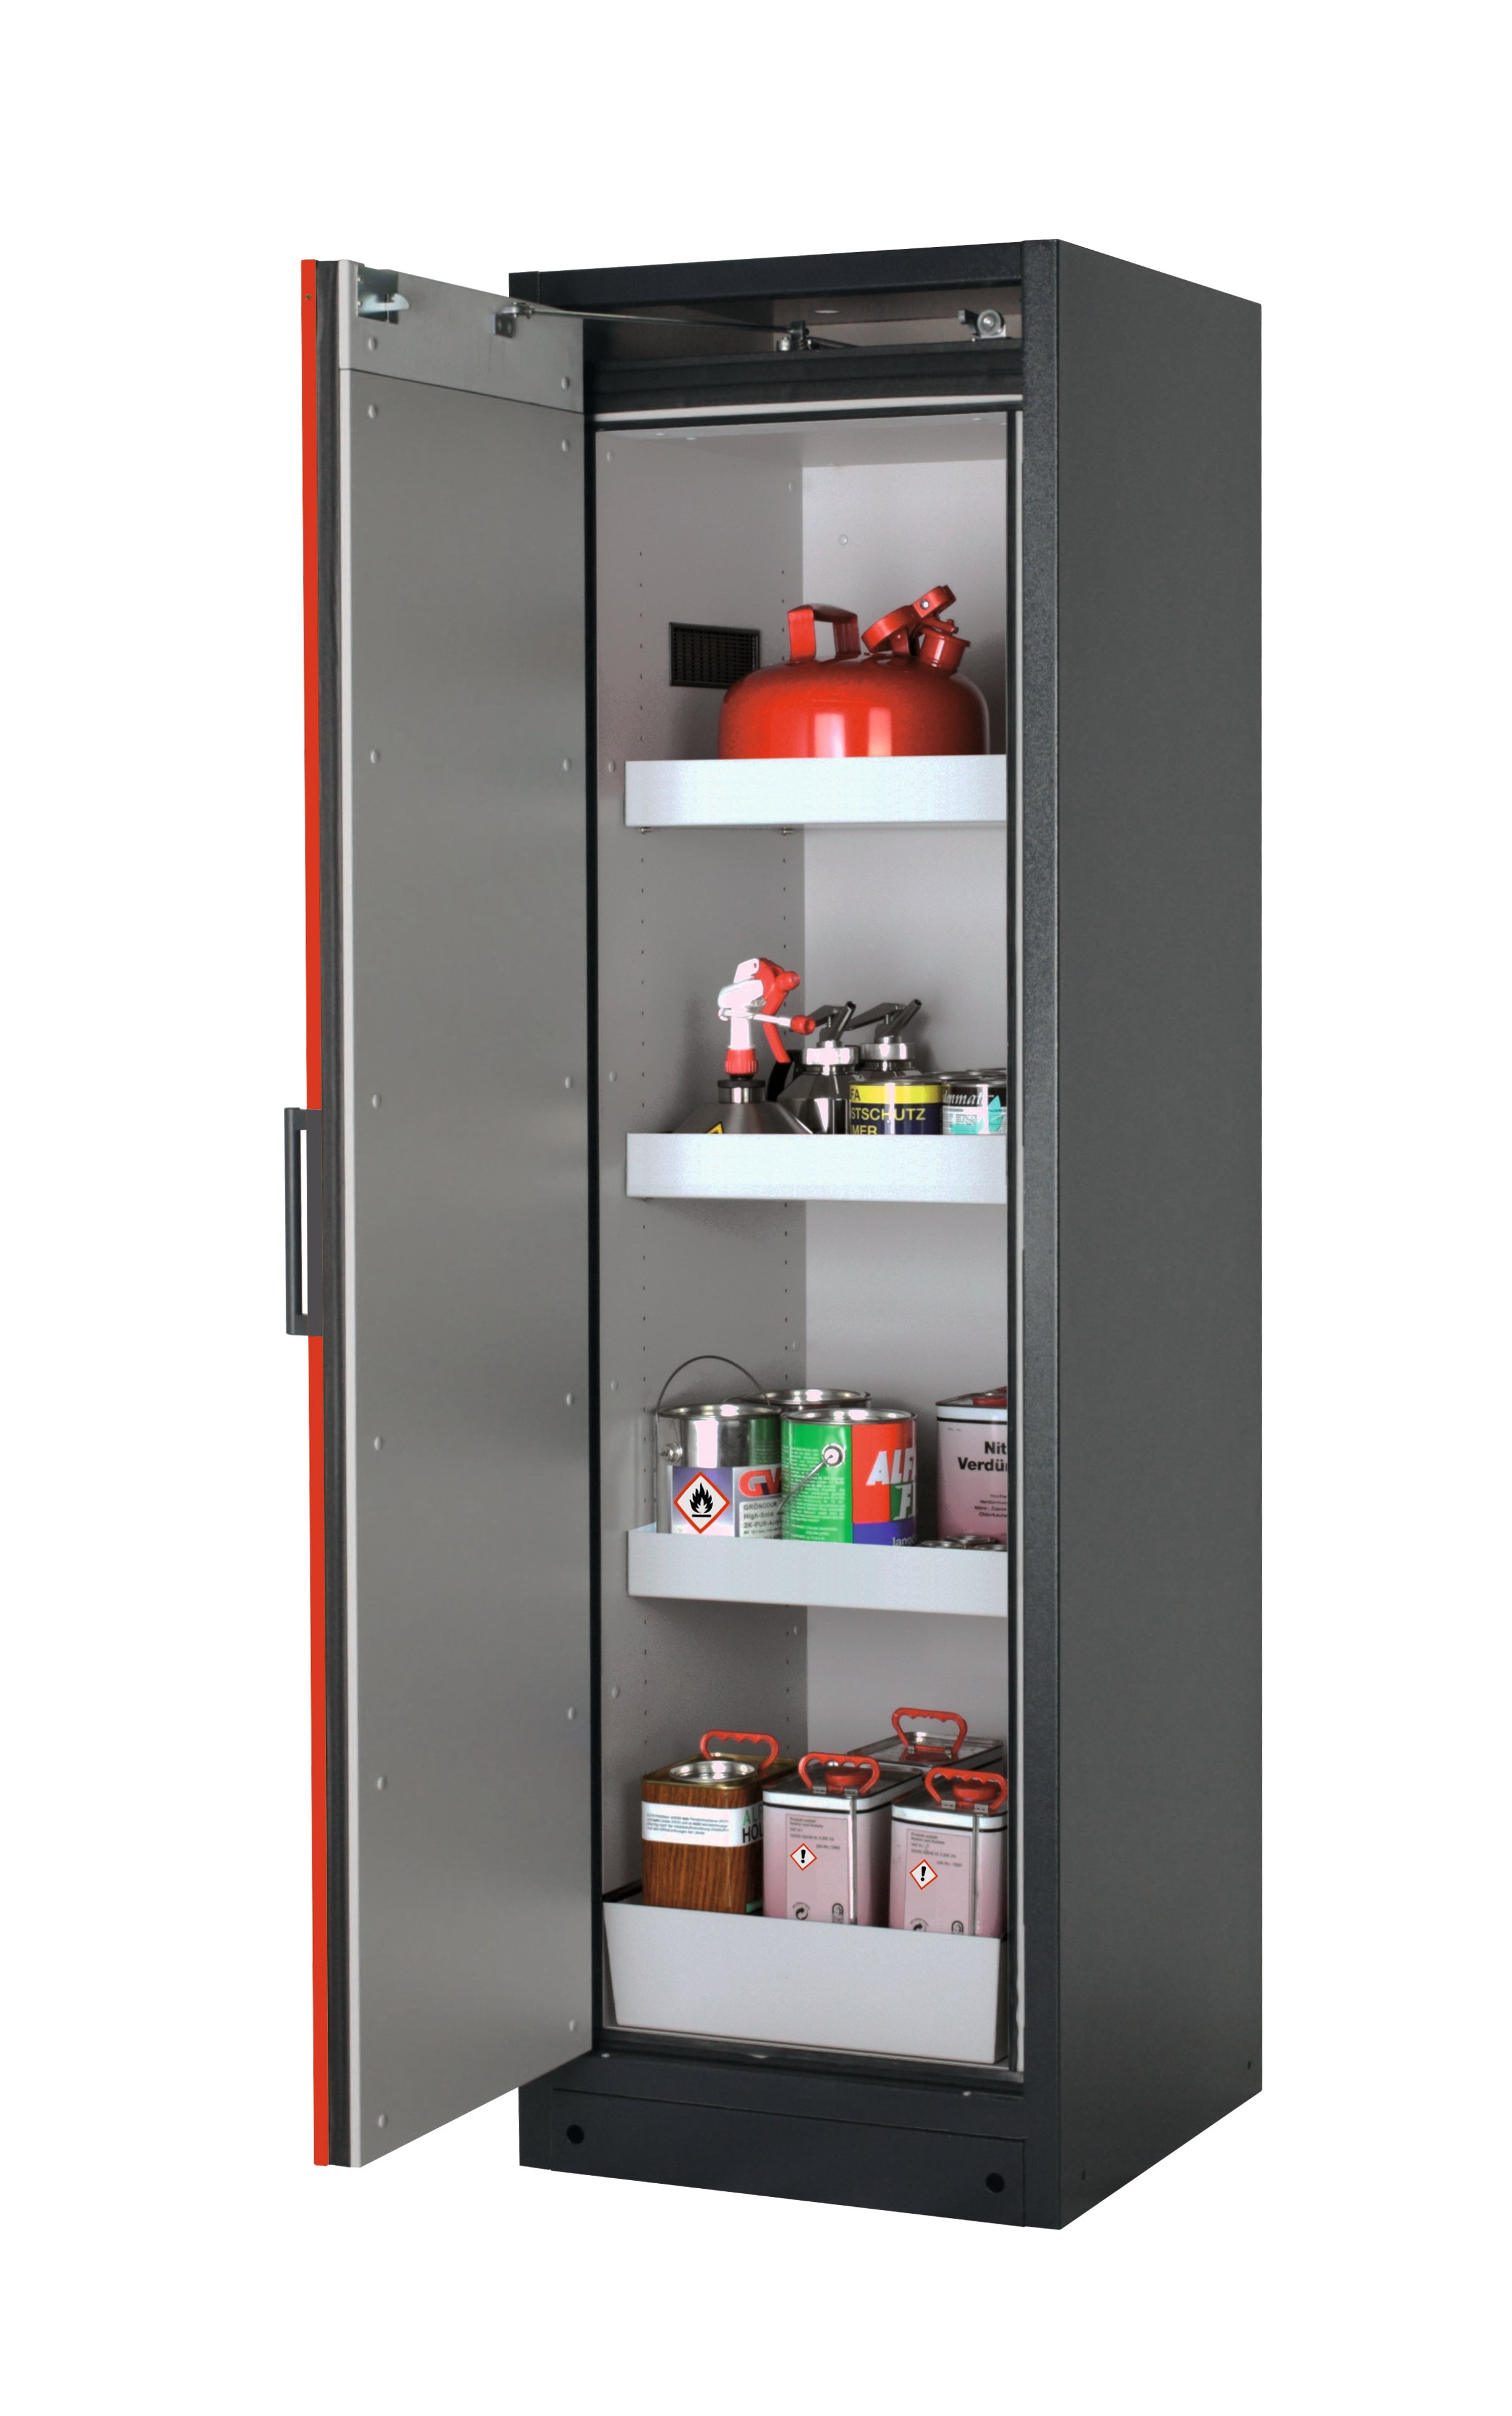 Type 90 safety storage cabinet Q-CLASSIC-90 model Q90.195.060 in traffic red RAL 3020 with 3x tray shelf (standard) (sheet steel),